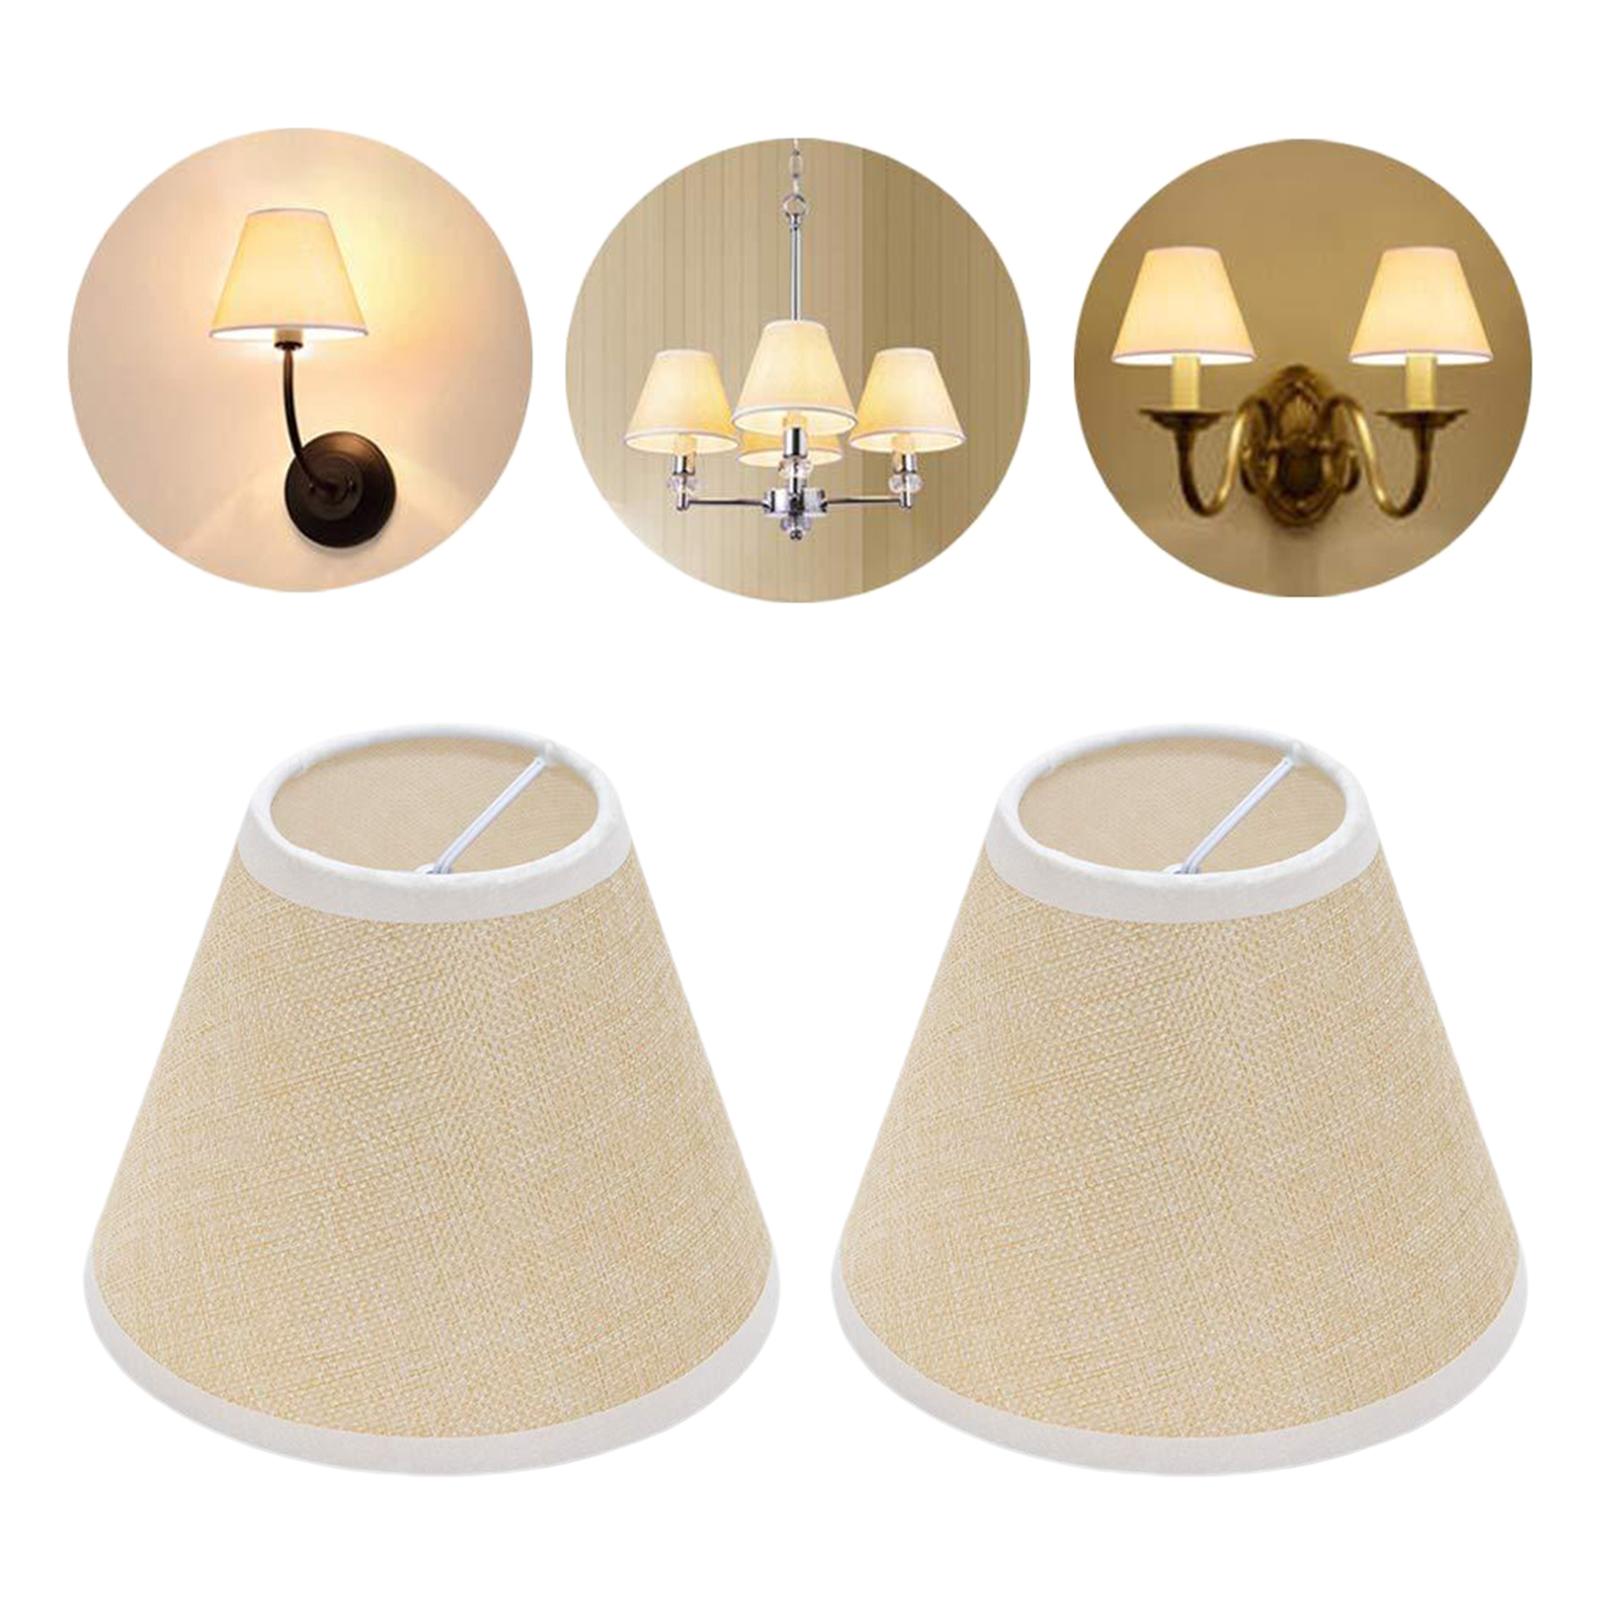 2x Pastoral Style Lamp Shade Lamp Dust Cover Clip On Cloth Hanging Light Khaki